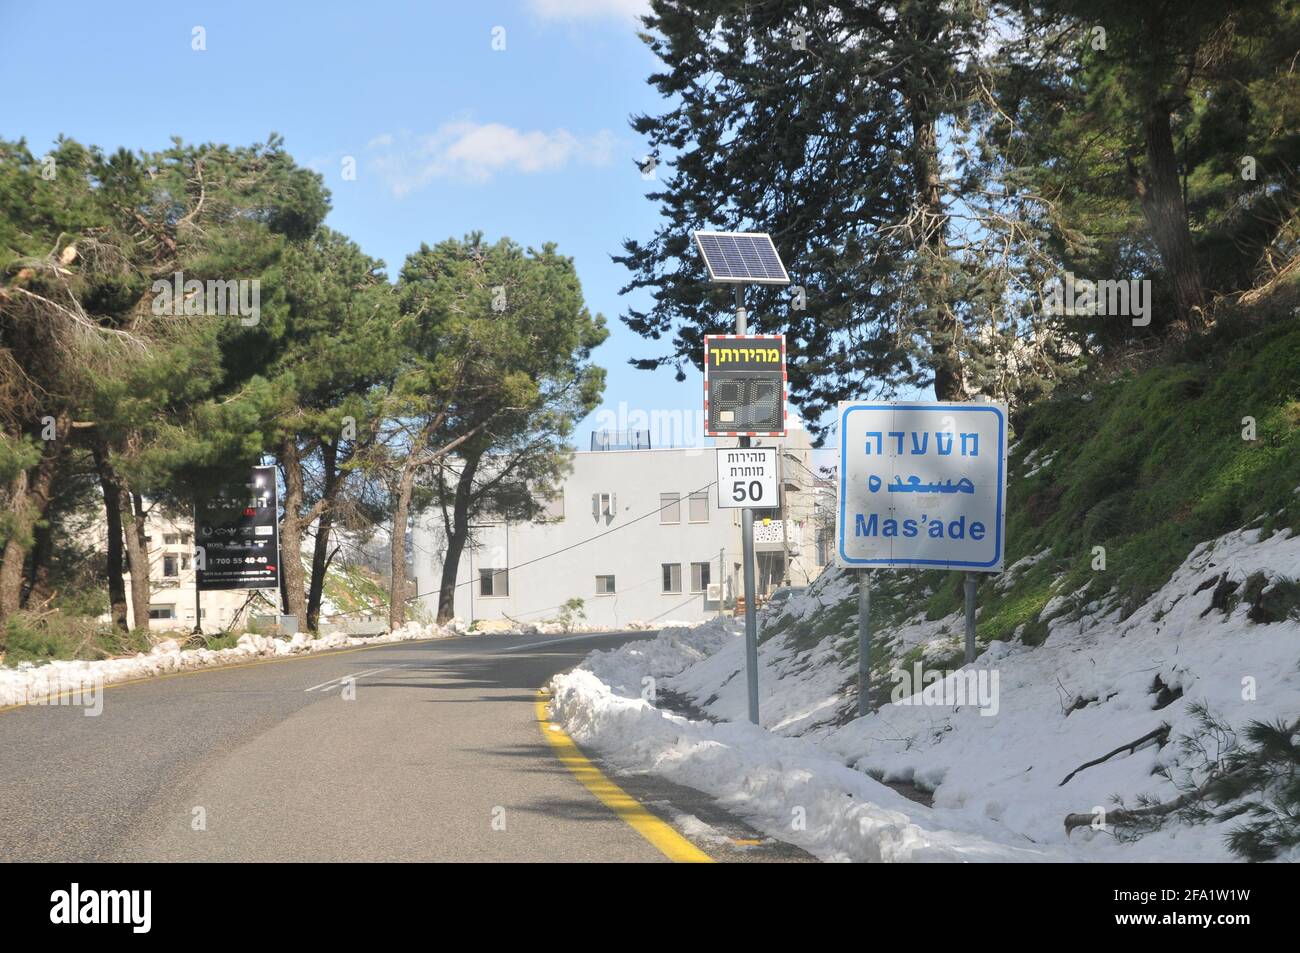 Israel, Golan Heights, The Druze vilege Massade (or Mas'ade) The welcome sign in English Arabic and Hebrew Stock Photo